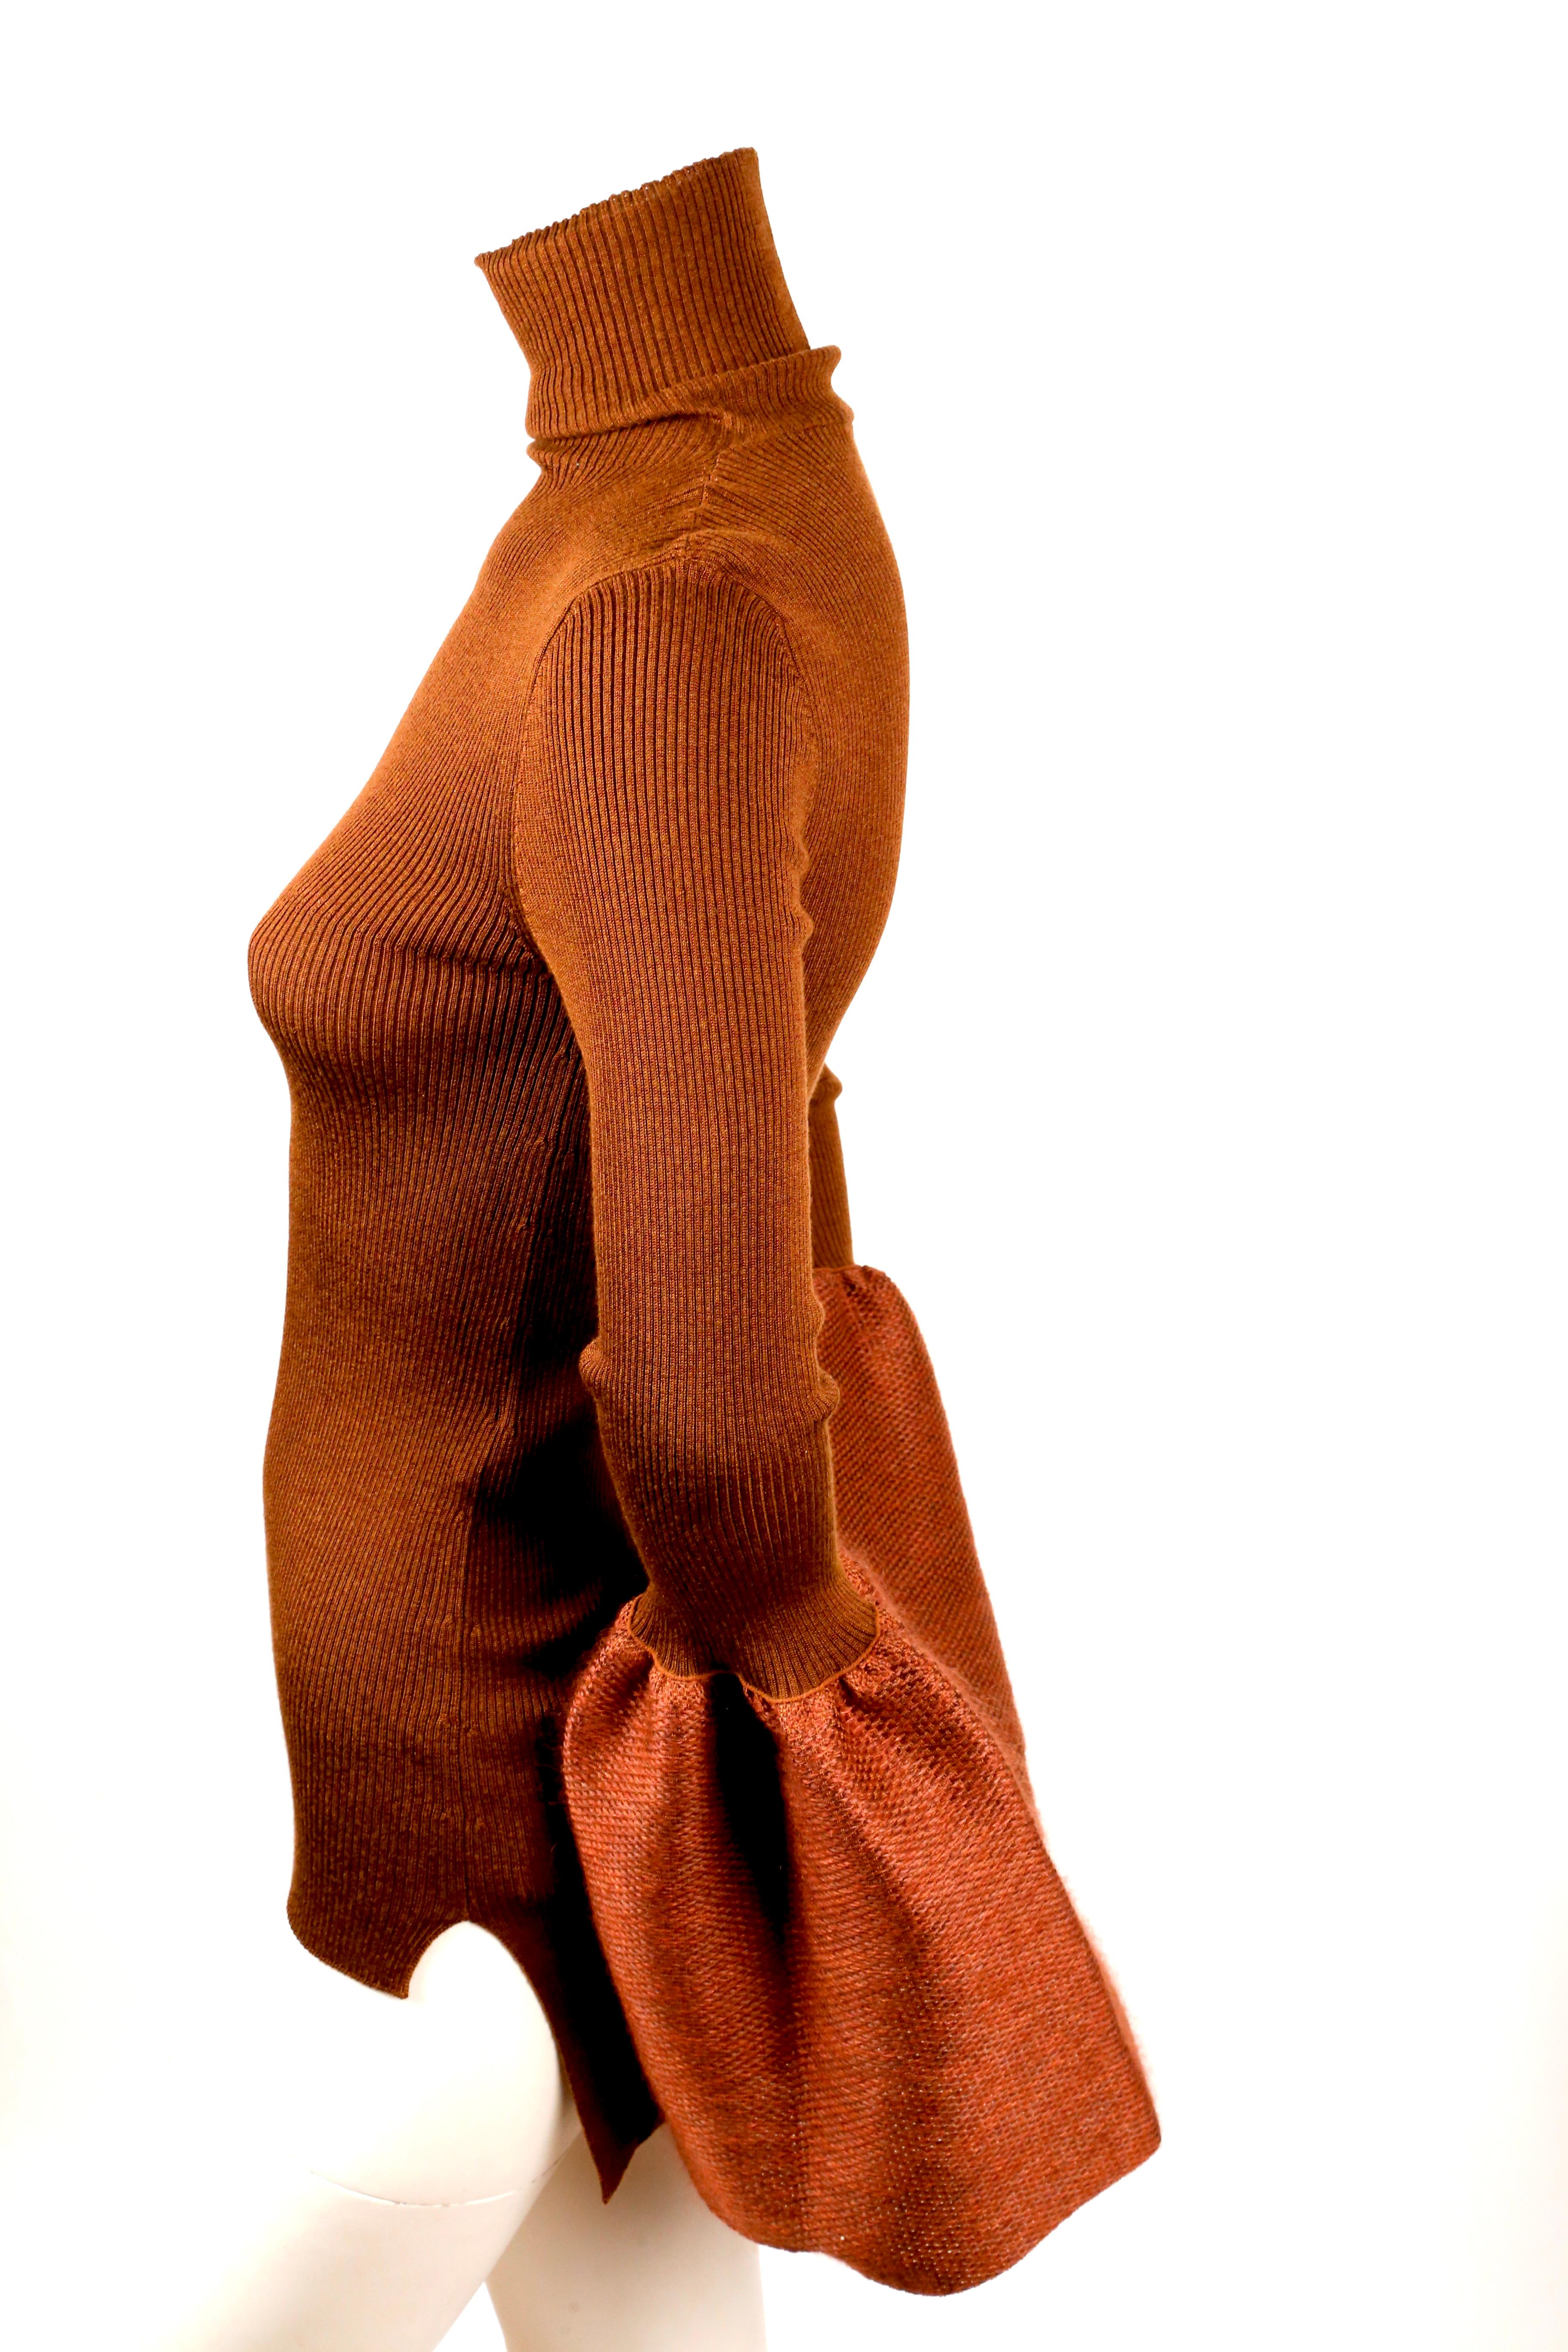 Brown silk and cashmere turtleneck with large bell sleeves designed by Phoebe Philo for Celine as seen on the fall 2015 runway. Size S. Approximate measurements (unstretched): shoulder 12